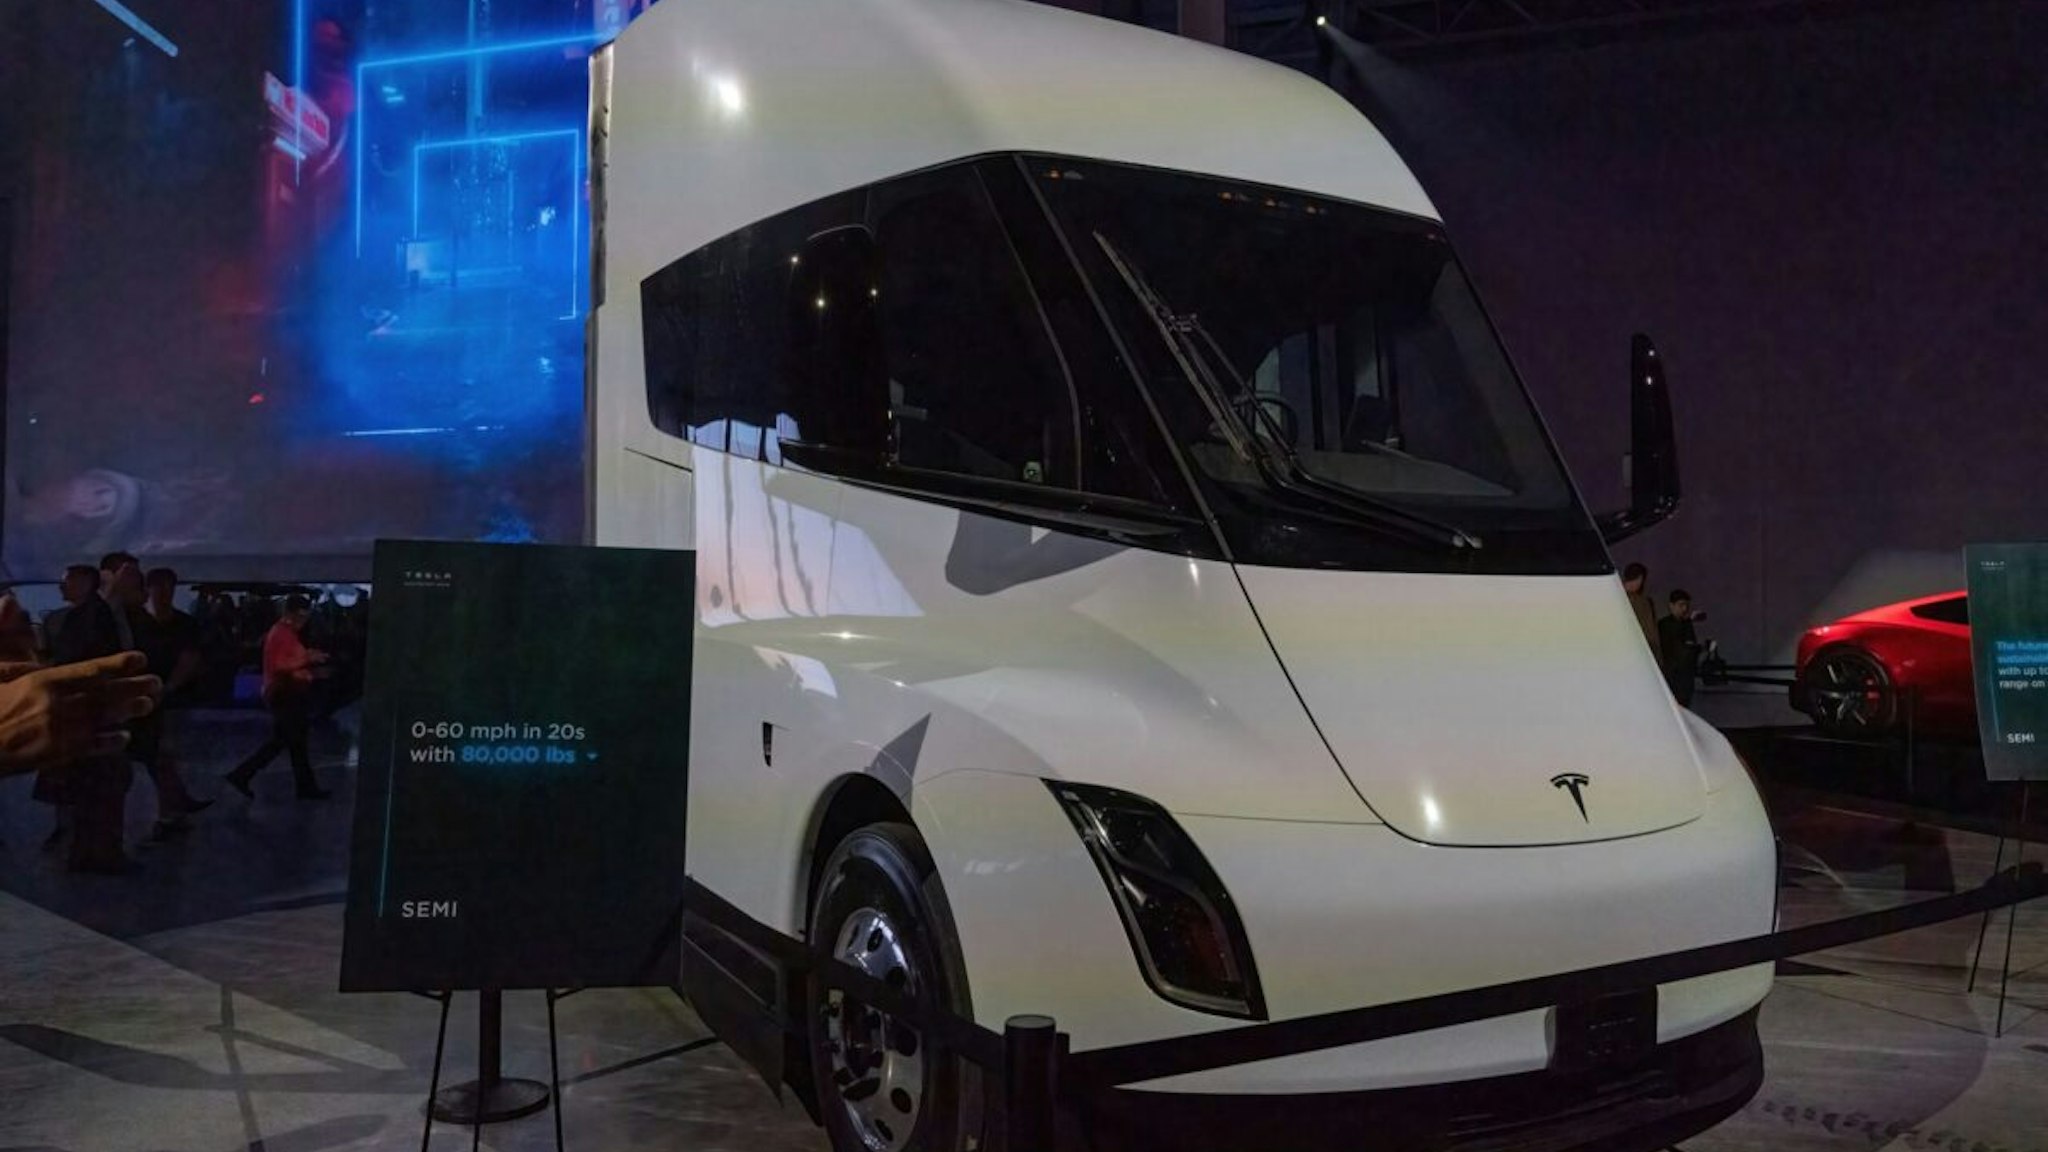 The Tesla Semi is on display at the Tesla Giga Texas manufacturing facility during the "Cyber Rodeo" grand opening party on April 7, 2022 in Austin, Texas